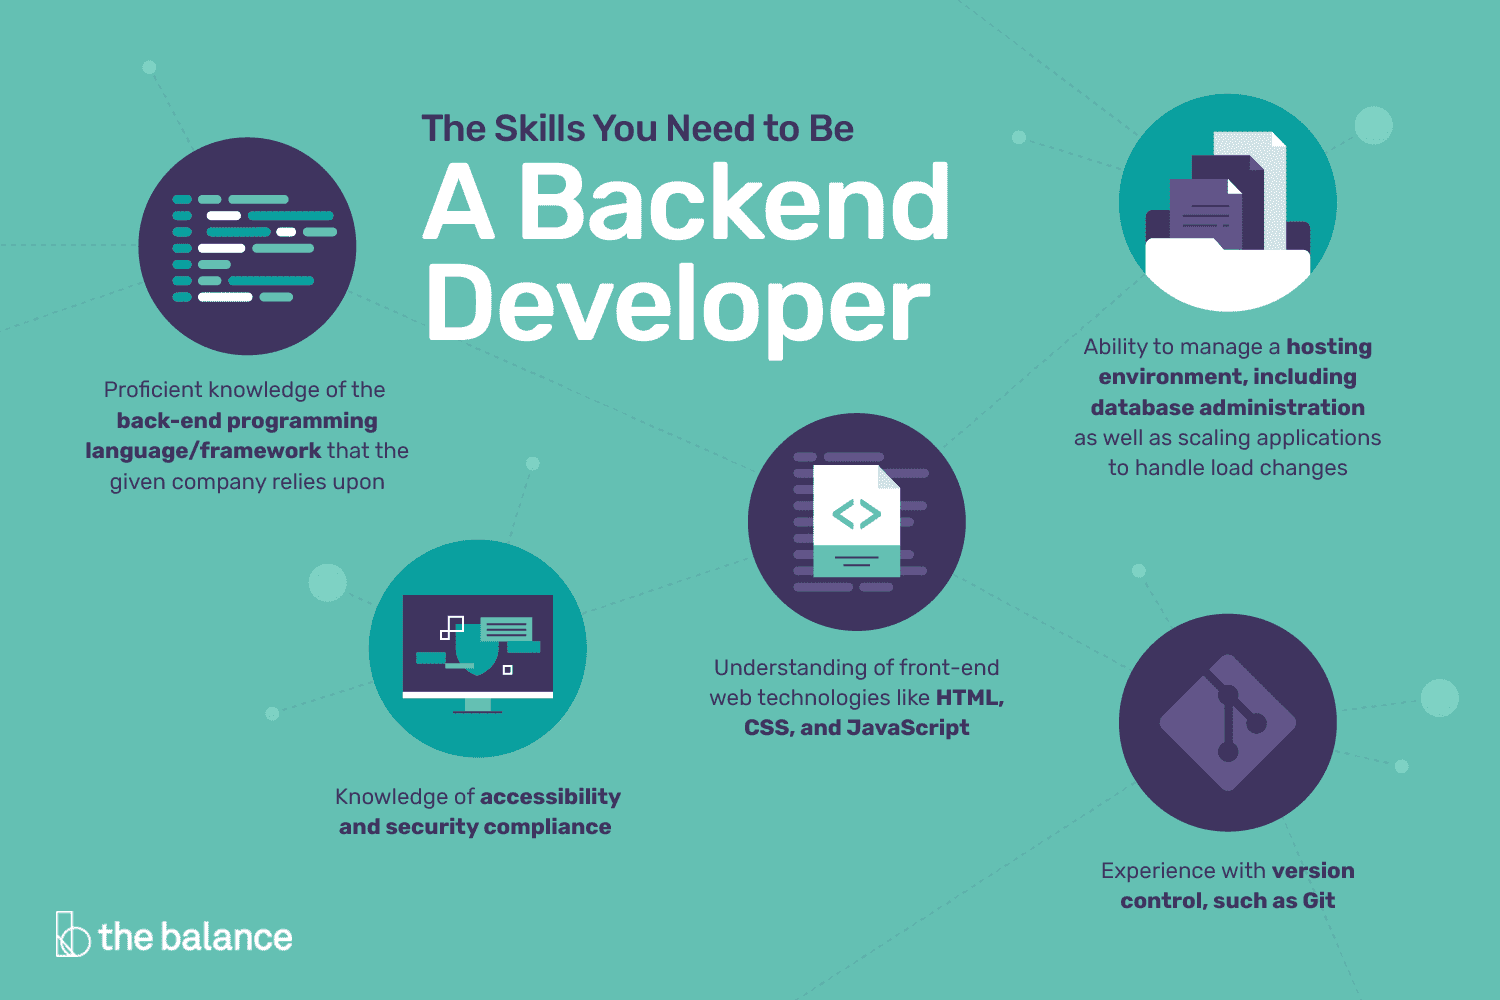 How Is The Job Market For Backend Developers?